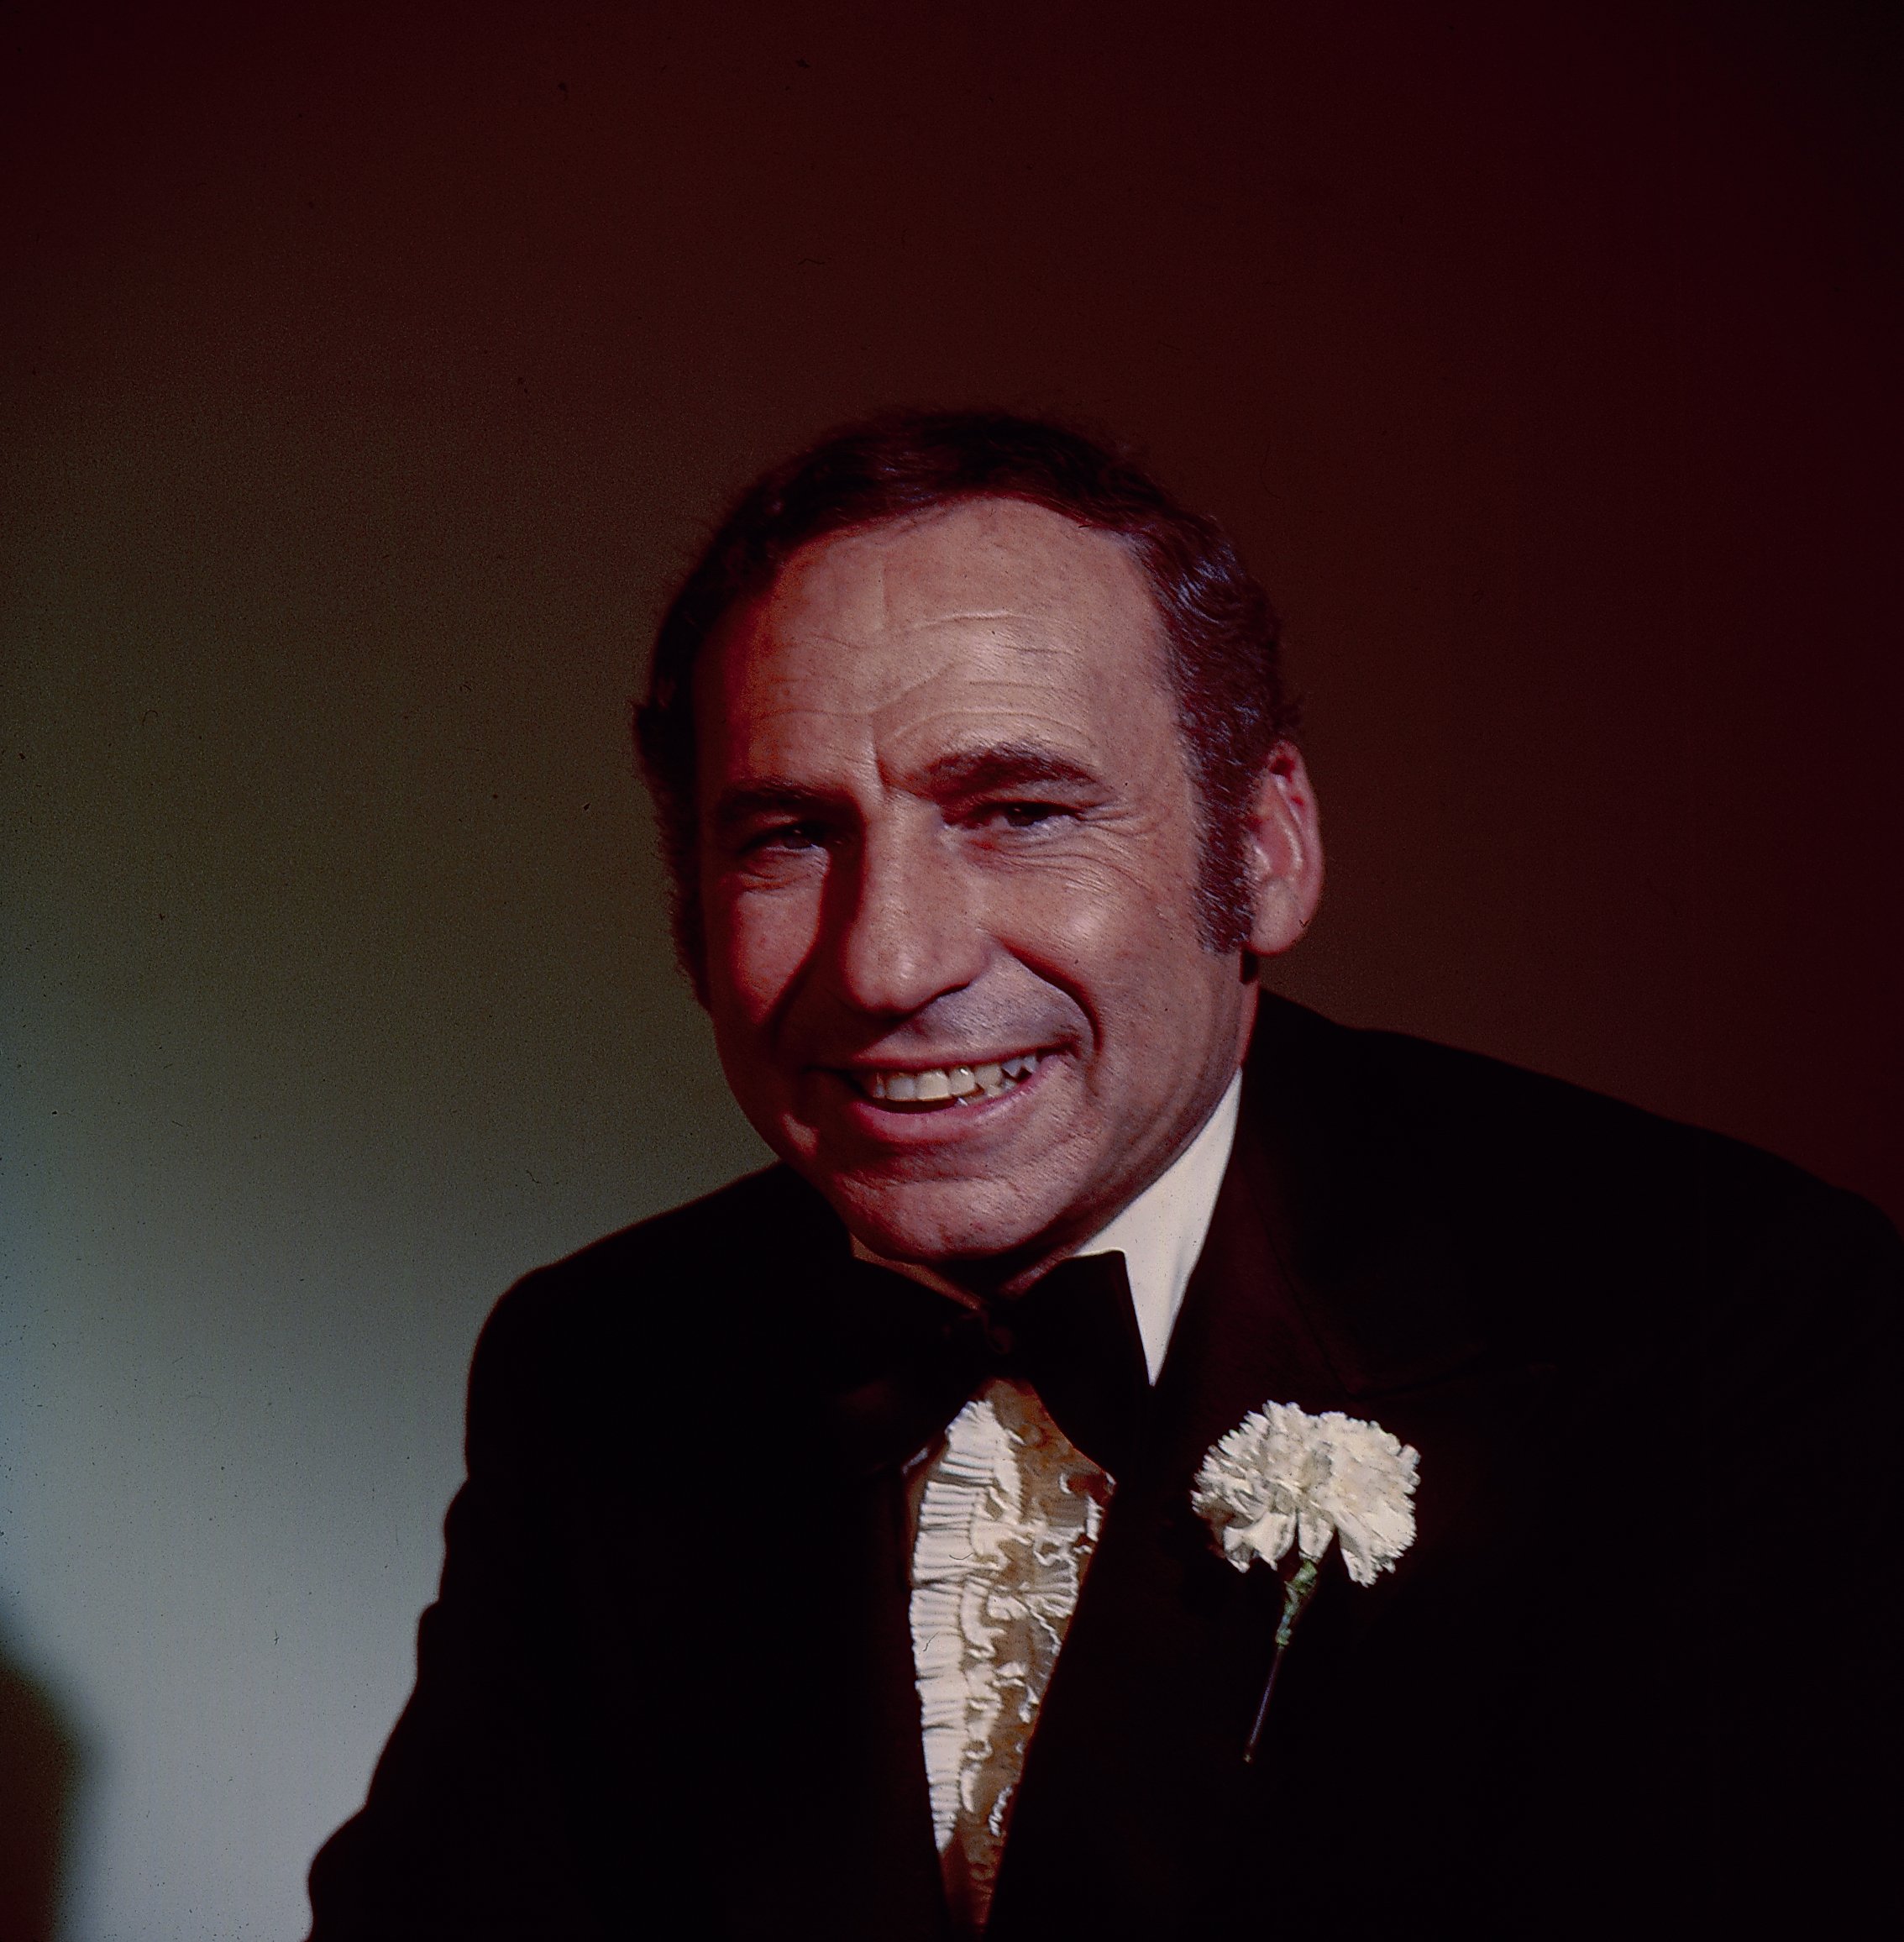 Actor Mel Brooks pictured in a scene from the movie "Silent Movie" on January 1, 1976 ┃Source: Getty Images